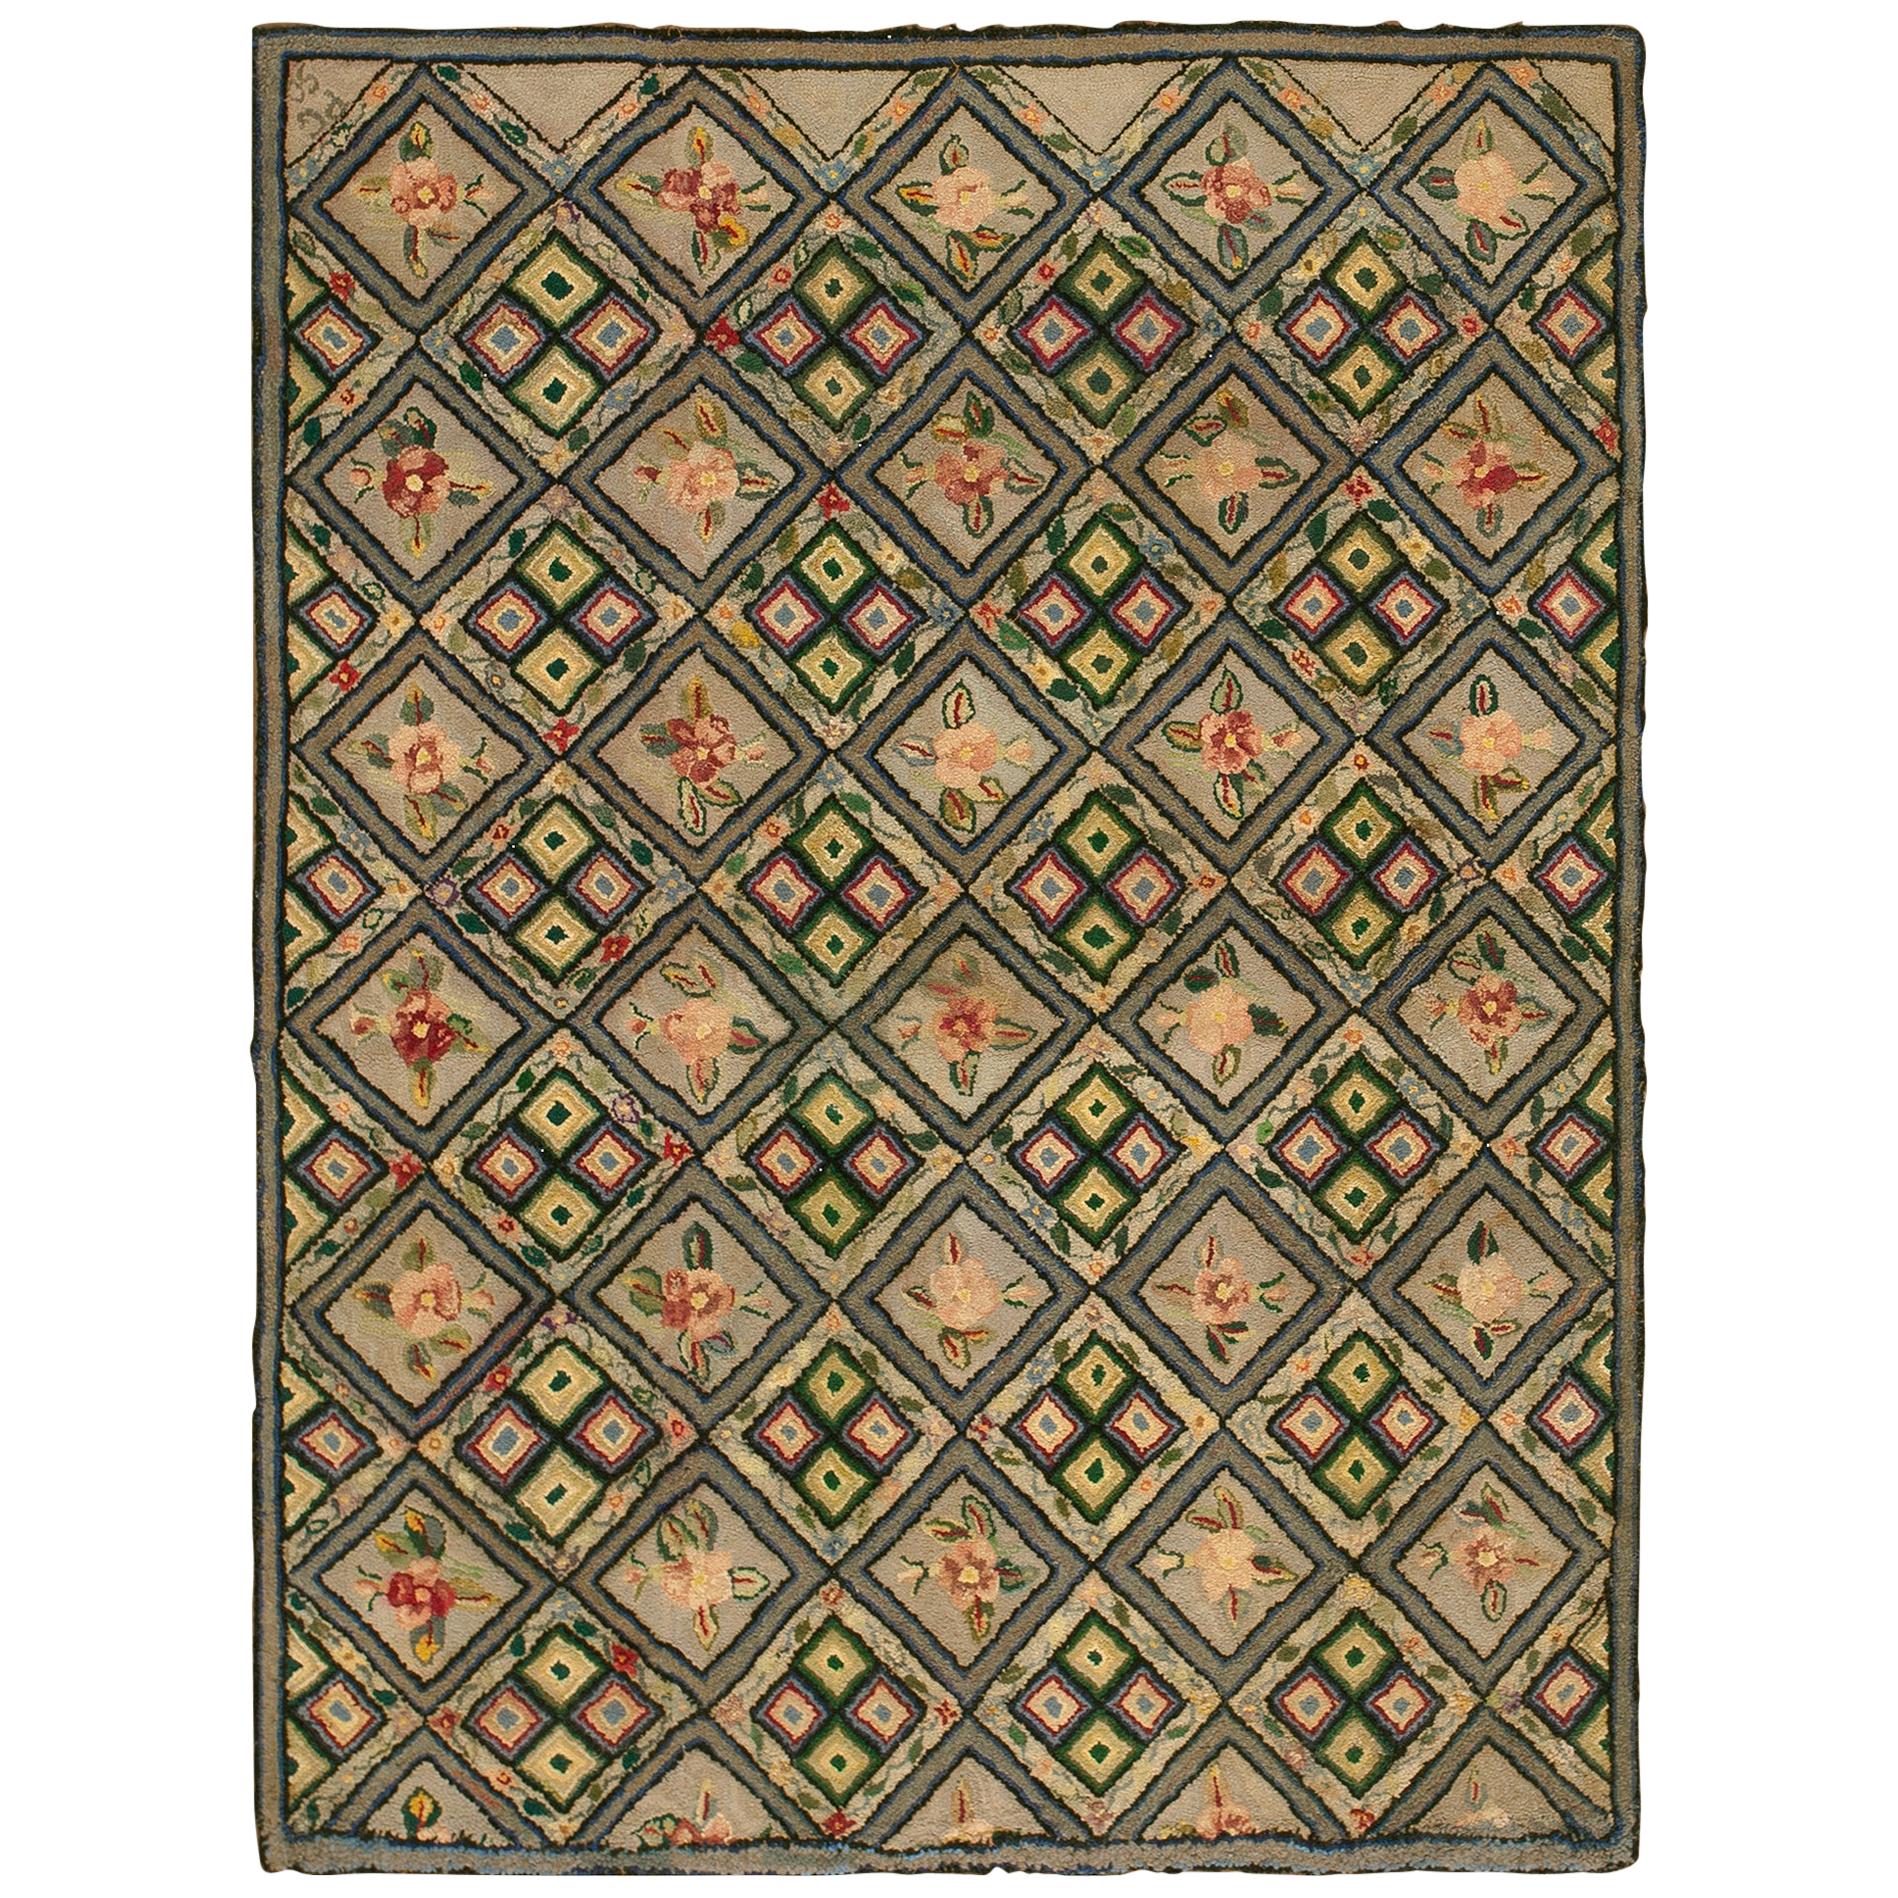 1920s American Hooked Rug ( 4'2" x 5'6" - 127 x 168 )